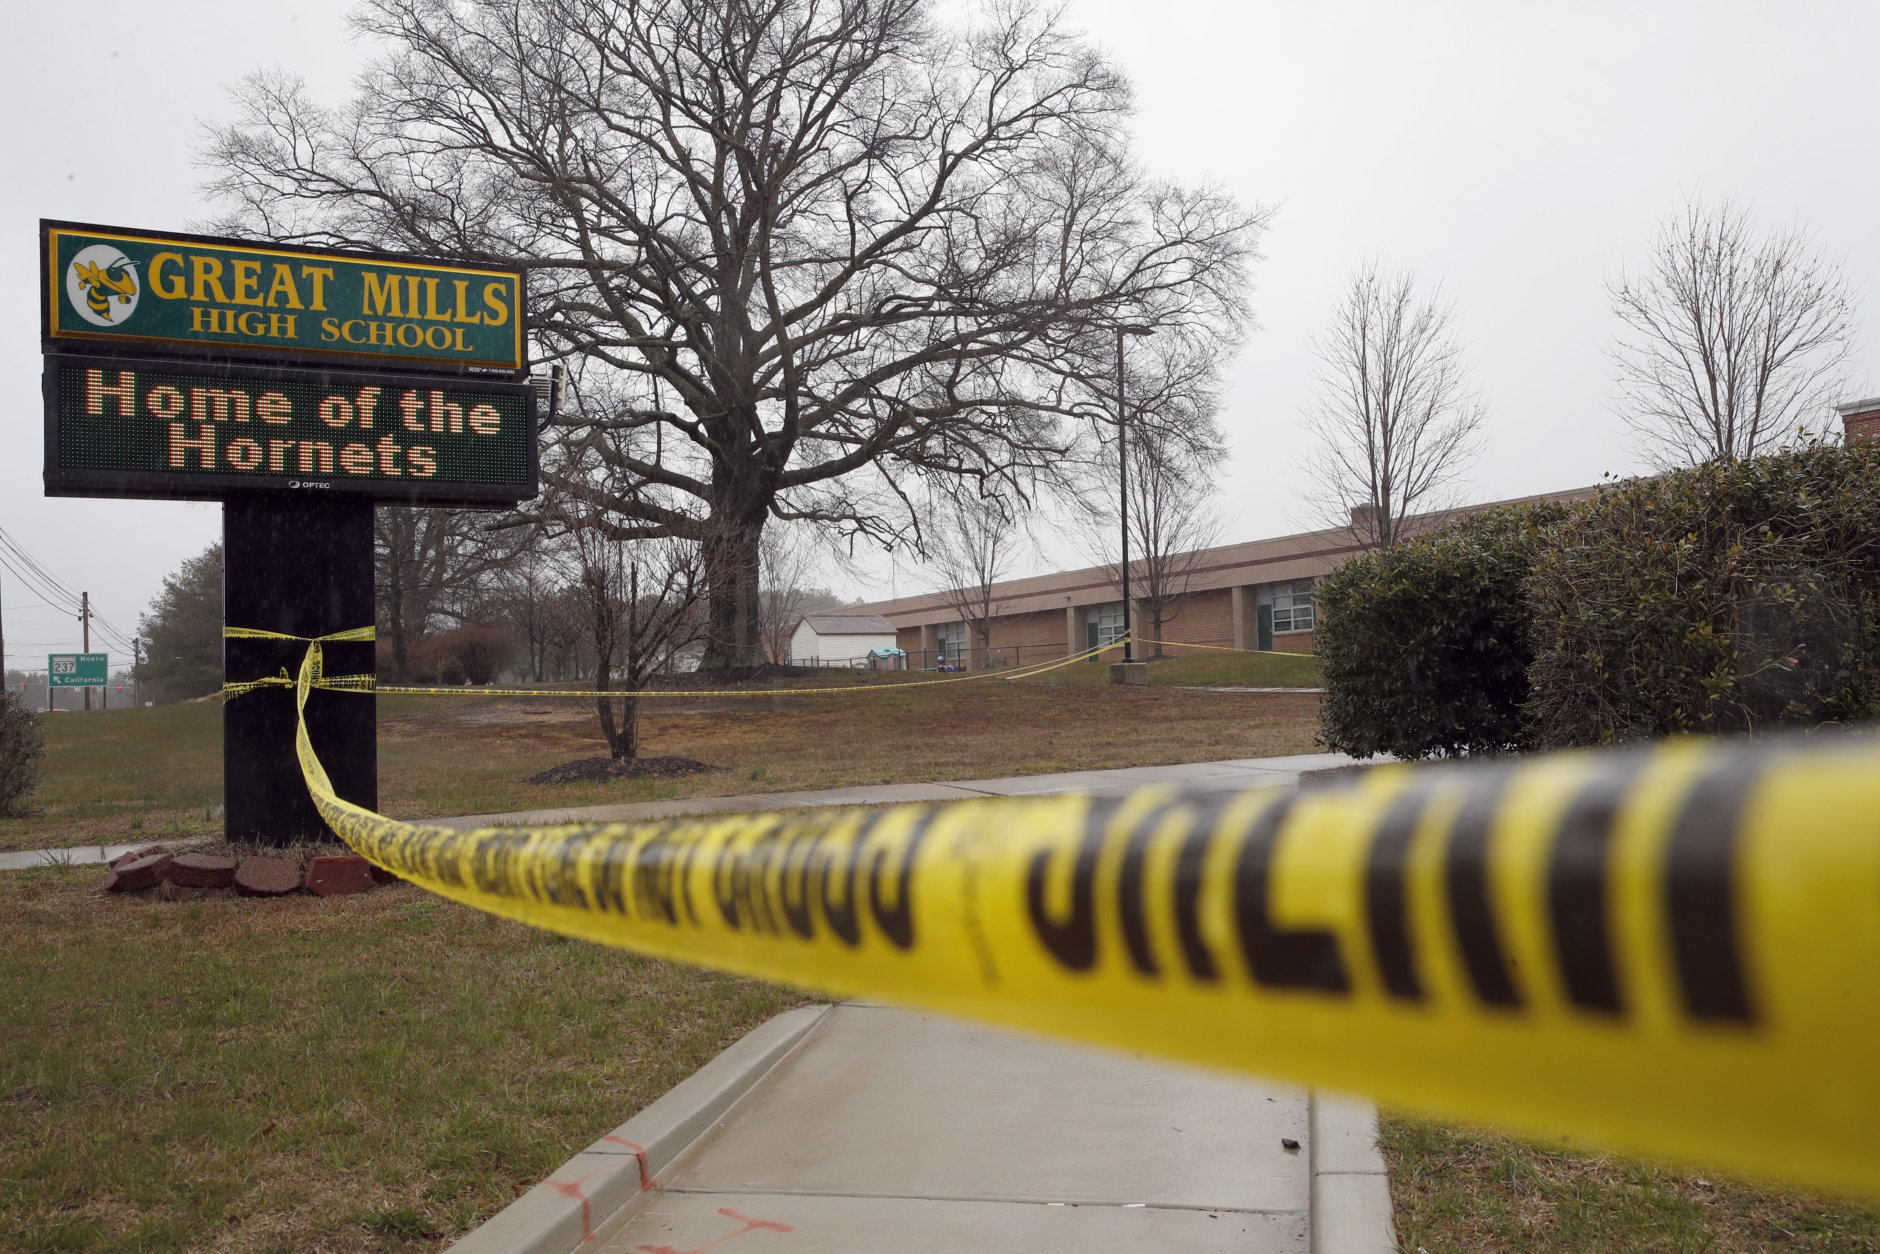 Crime scene tape is used around Great Mills High School, the scene of a shooting, Tuesday, March 20, 2018, in Great Mills. A student with a handgun shot two classmates inside the school before he was fatally wounded during a confrontation with a school resource officer, a sheriff said. (AP Photo/Alex Brandon)